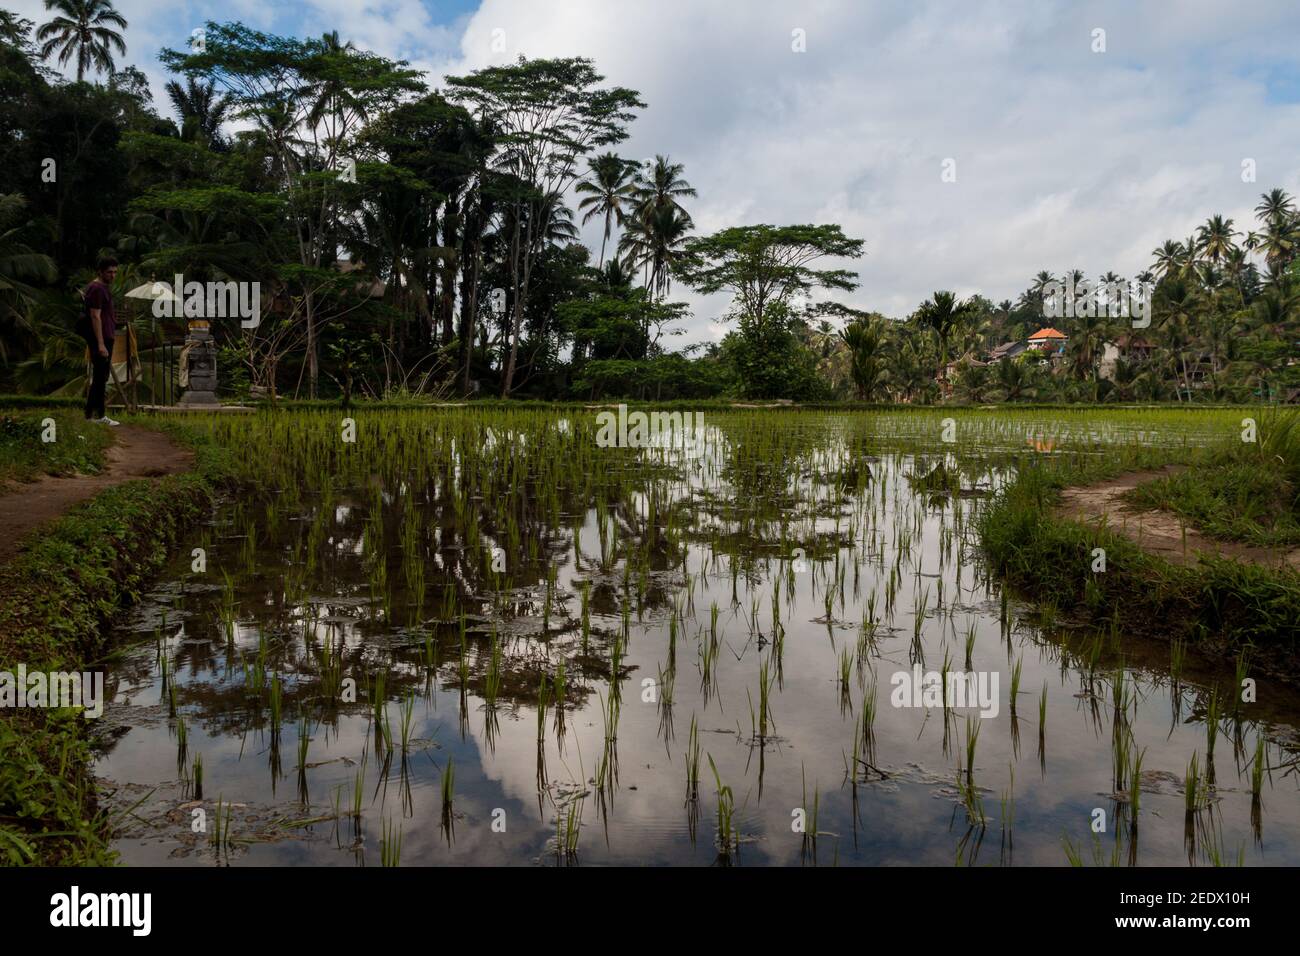 Rice cultivation in water at Tegallalang Rice Terrace in Bali Stock Photo